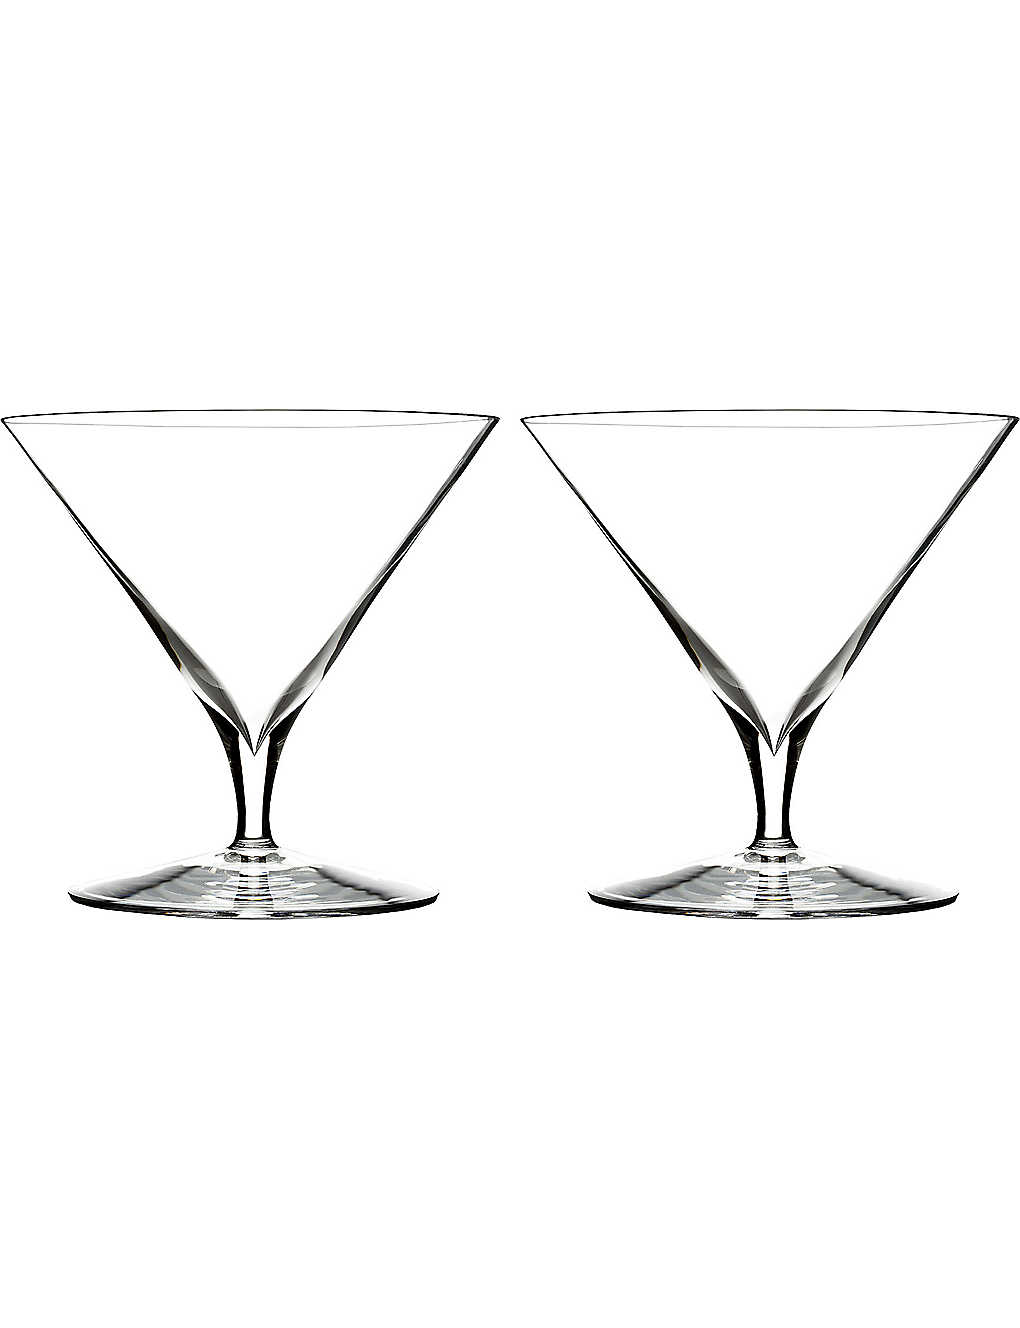 WATERFORD エレガンスマーティニ ステム クリスタル カクテルグラス 2個セット Elegance Martini stemmed crystal cocktail glasses set of two